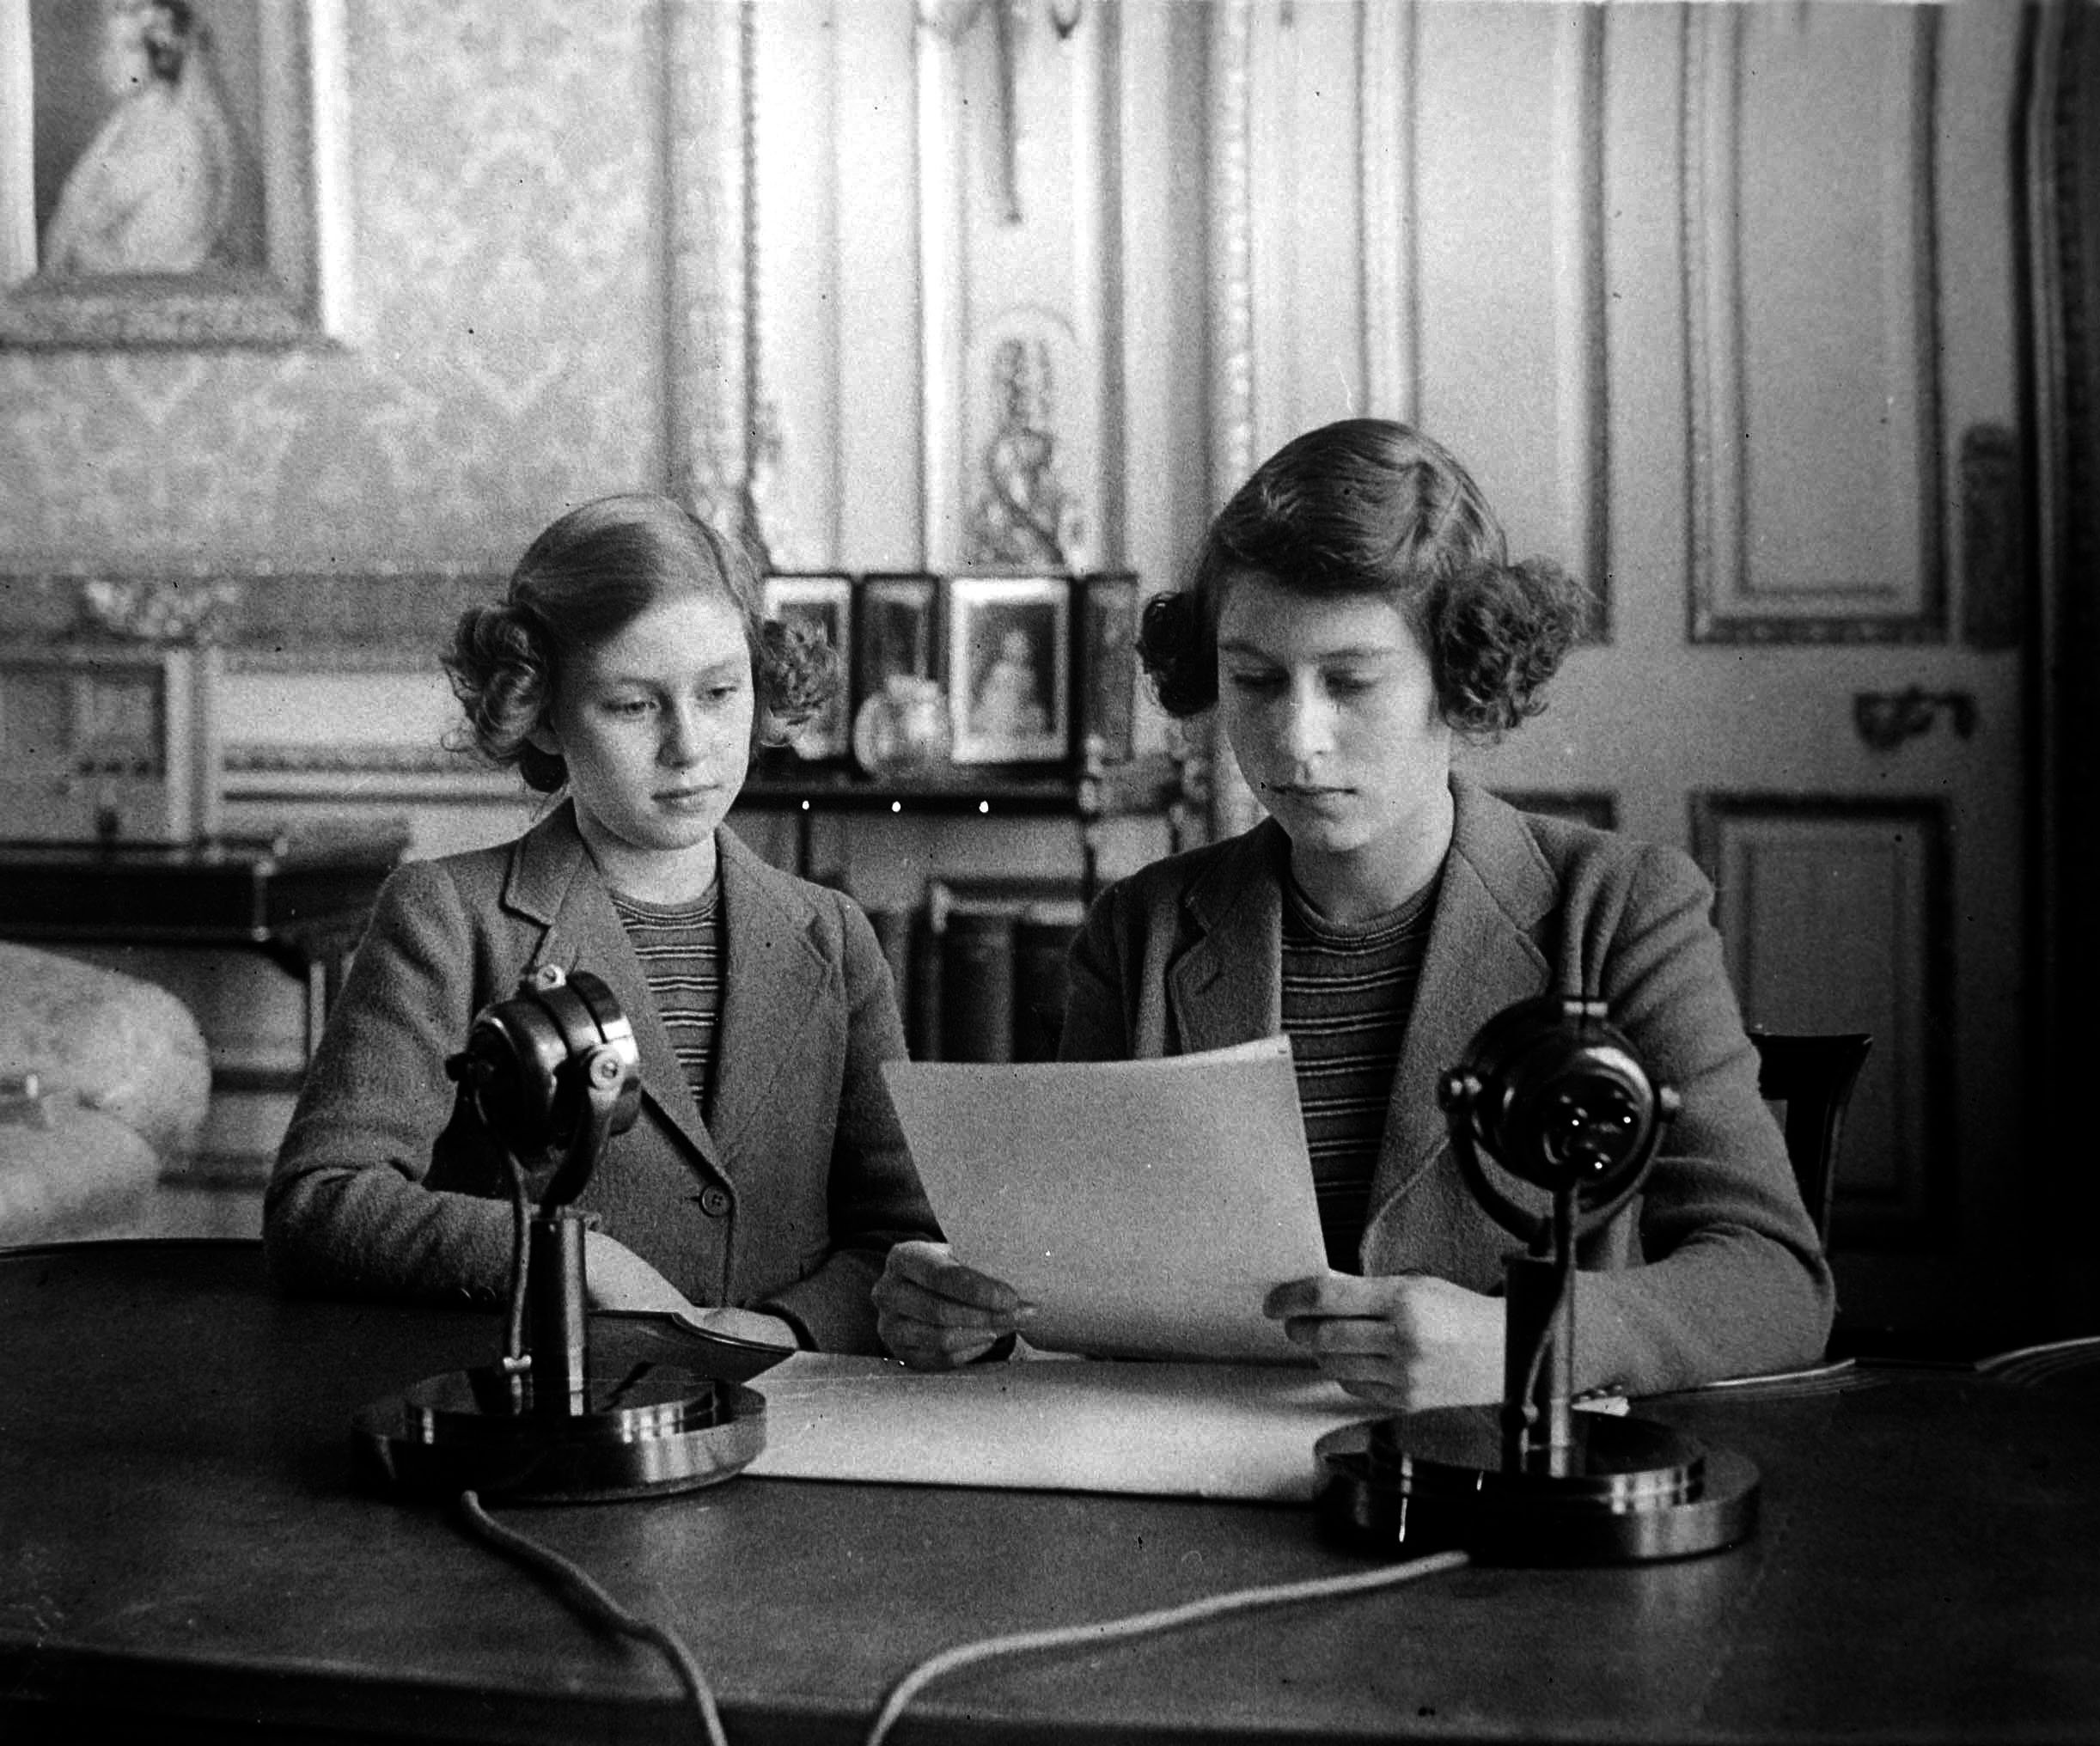 Princess Margaret (1930-2002), on left, and Princess Elizabeth give their first Children's Hour radio broadcast to the nation from Windsor Castle in Windsor, England during The Blitz and Battle of Britain in World War II on 13th October 1940. | Source: Getty Images